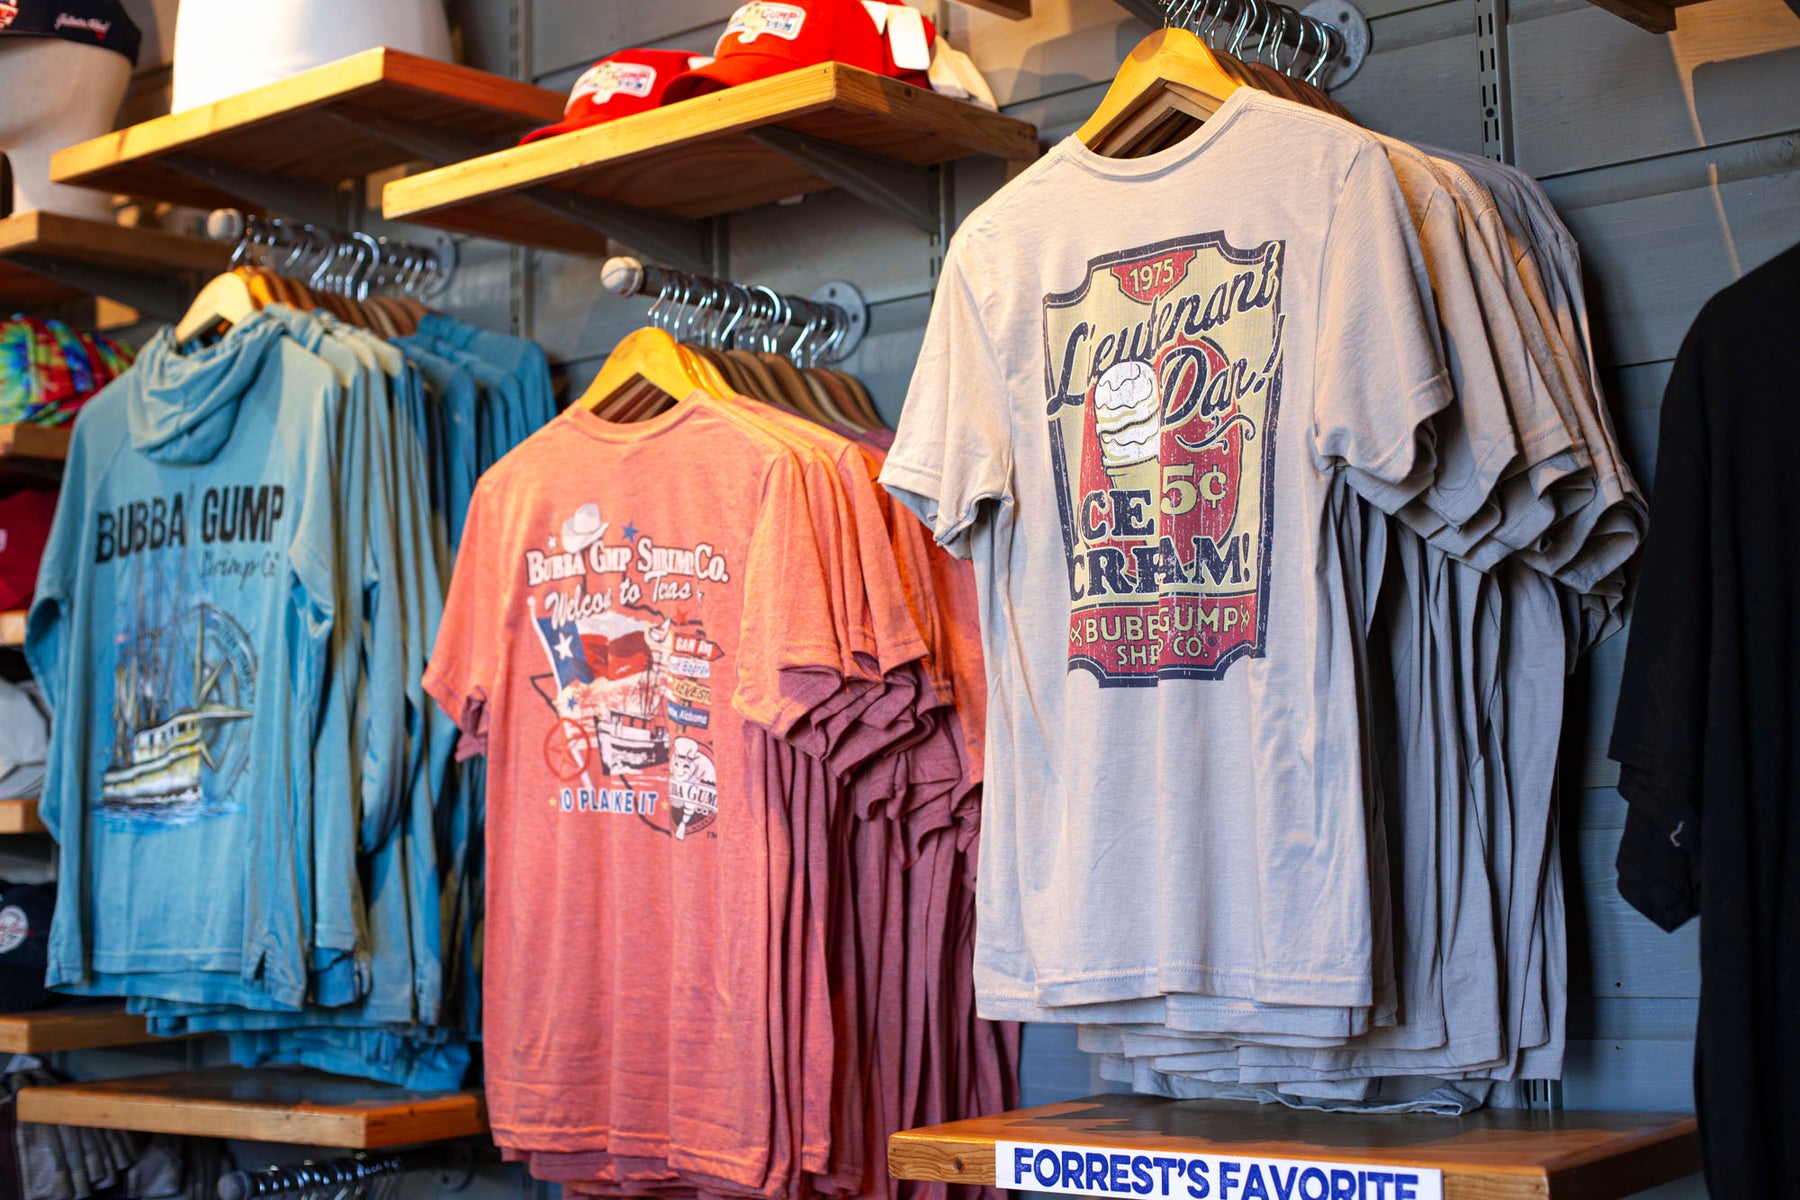 Bubba Gump tee shirts in the store wall on hangers. 